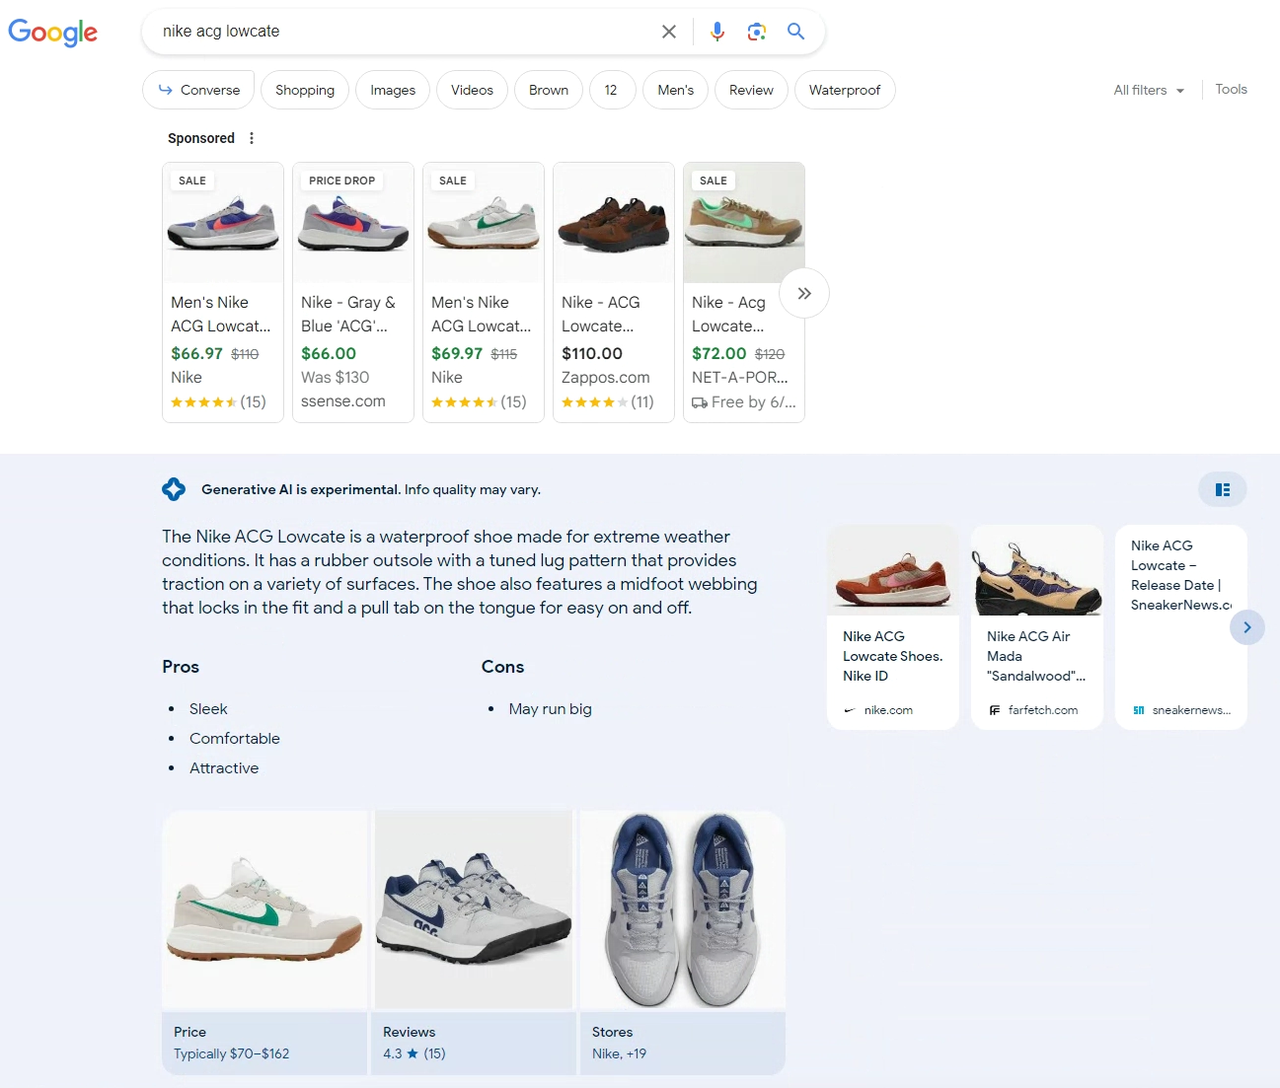 Google's Generative AI showing shopping results for Nike ACG Lowcate trainers. The results include some extra information about the trainer's features.